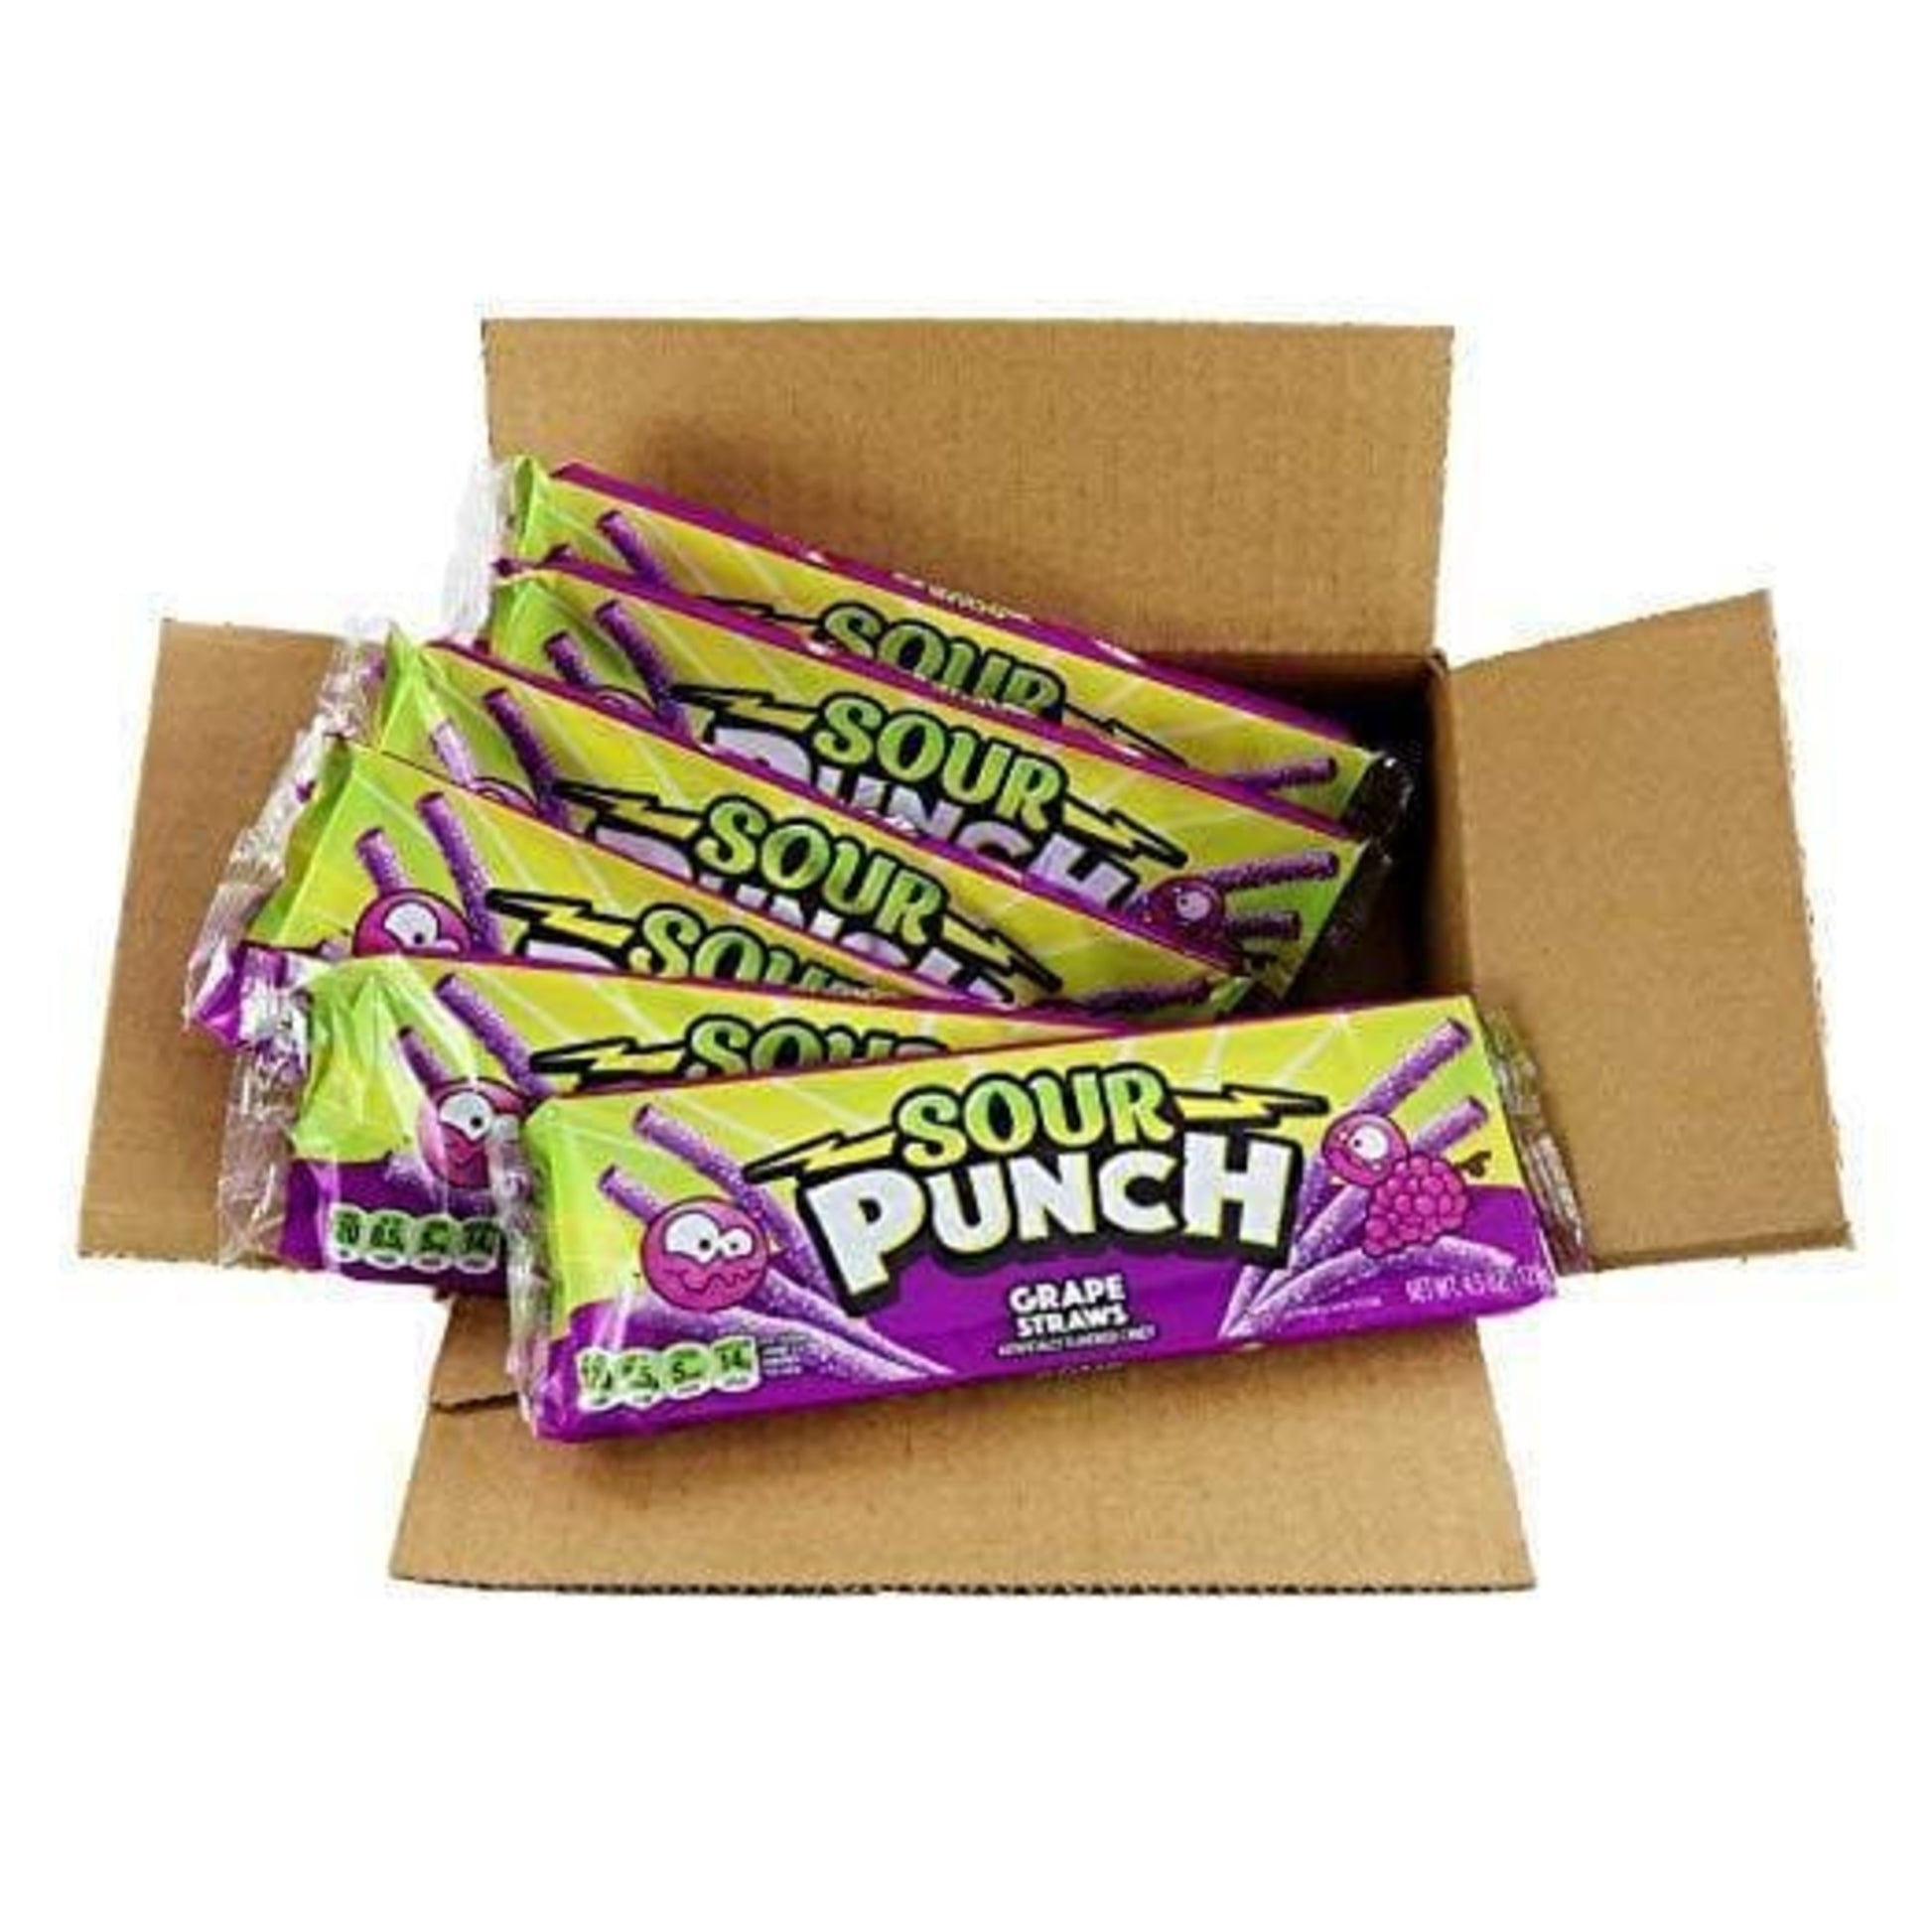 6 count box of Sour Punch Grape Candy Straws 4.5oz trays